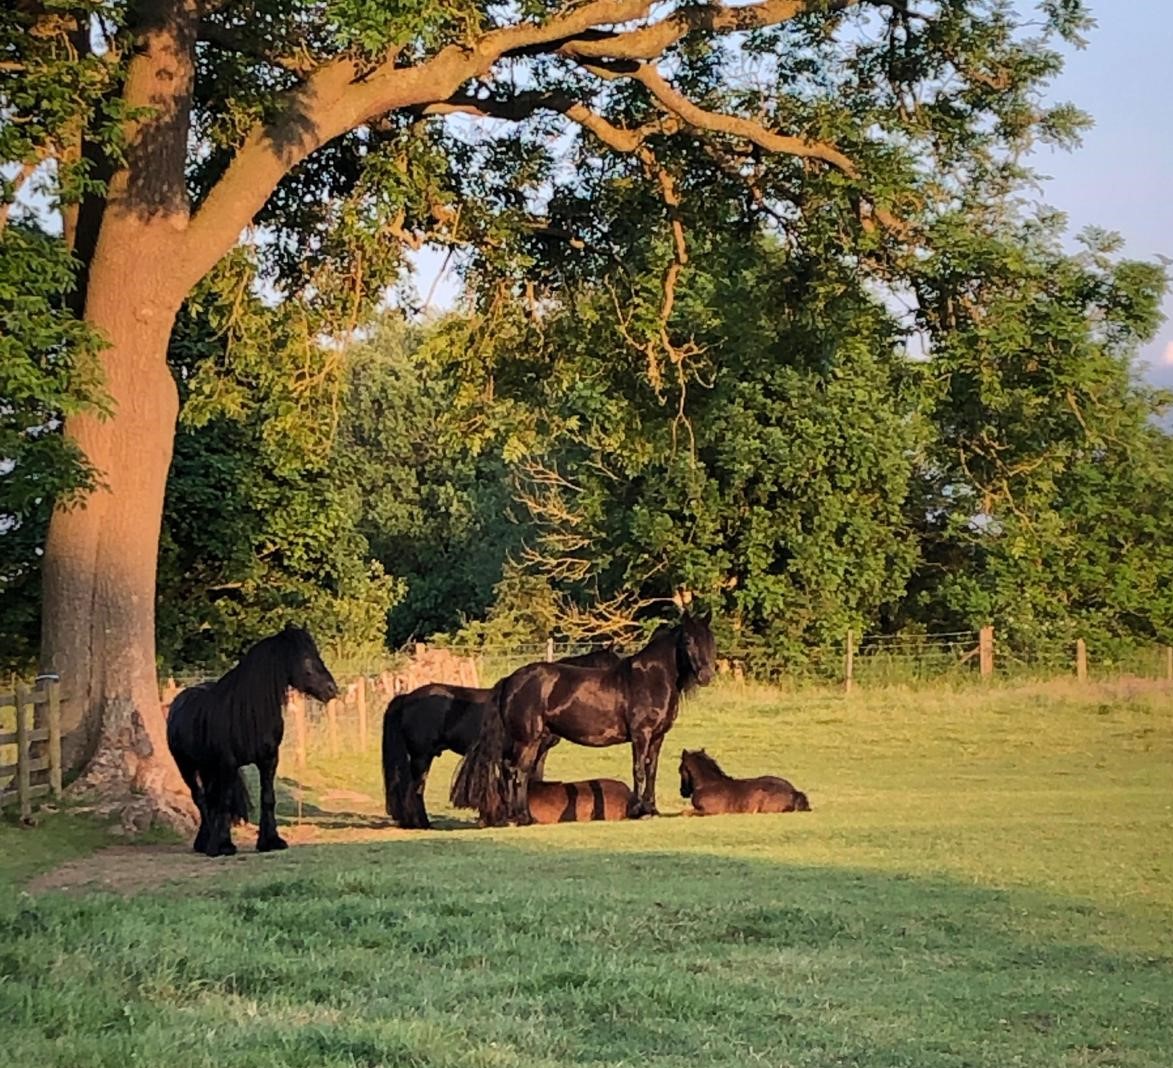 black ponies in the shade of a tree in a sunny field